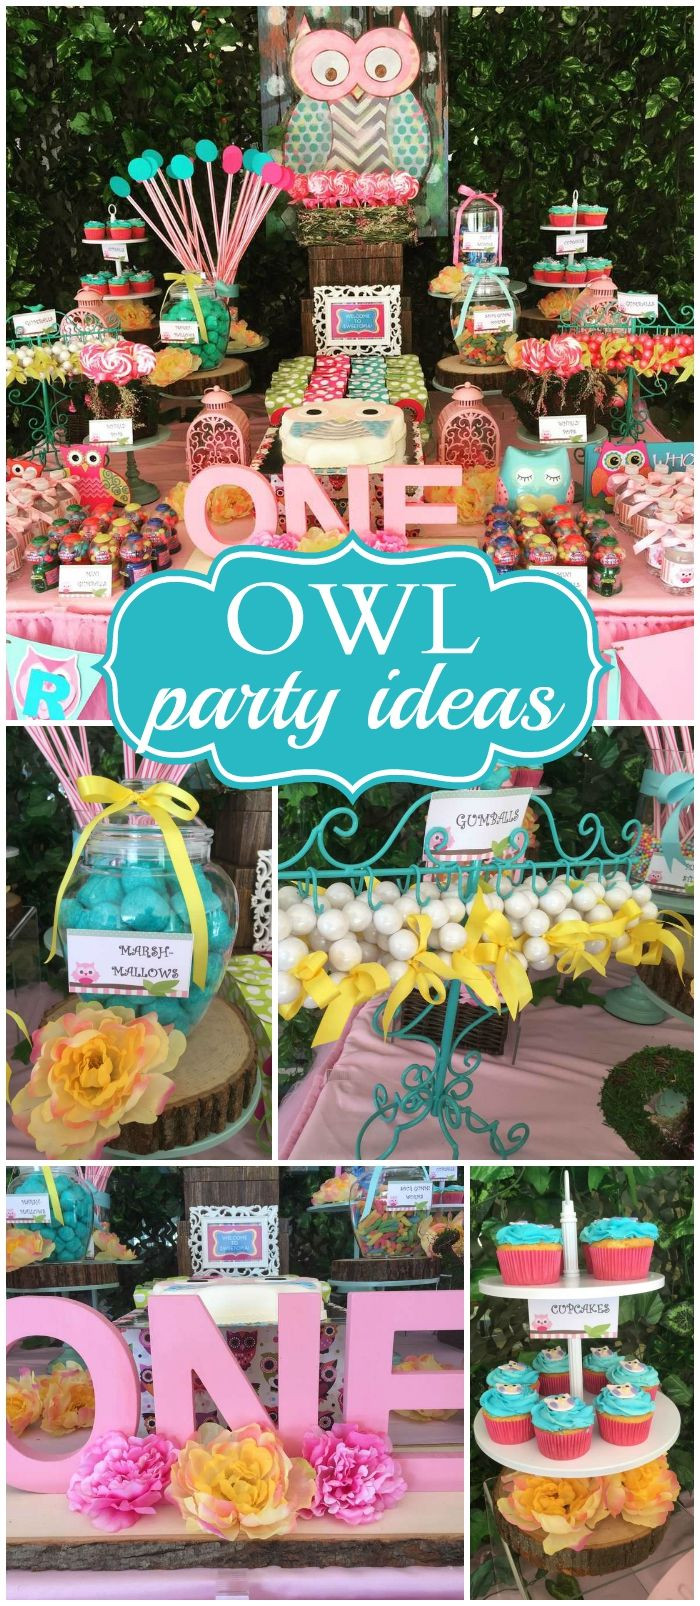 Owl Baby Shower Decorations Party City
 Owls Birthday "Look Whoo s Turning e"